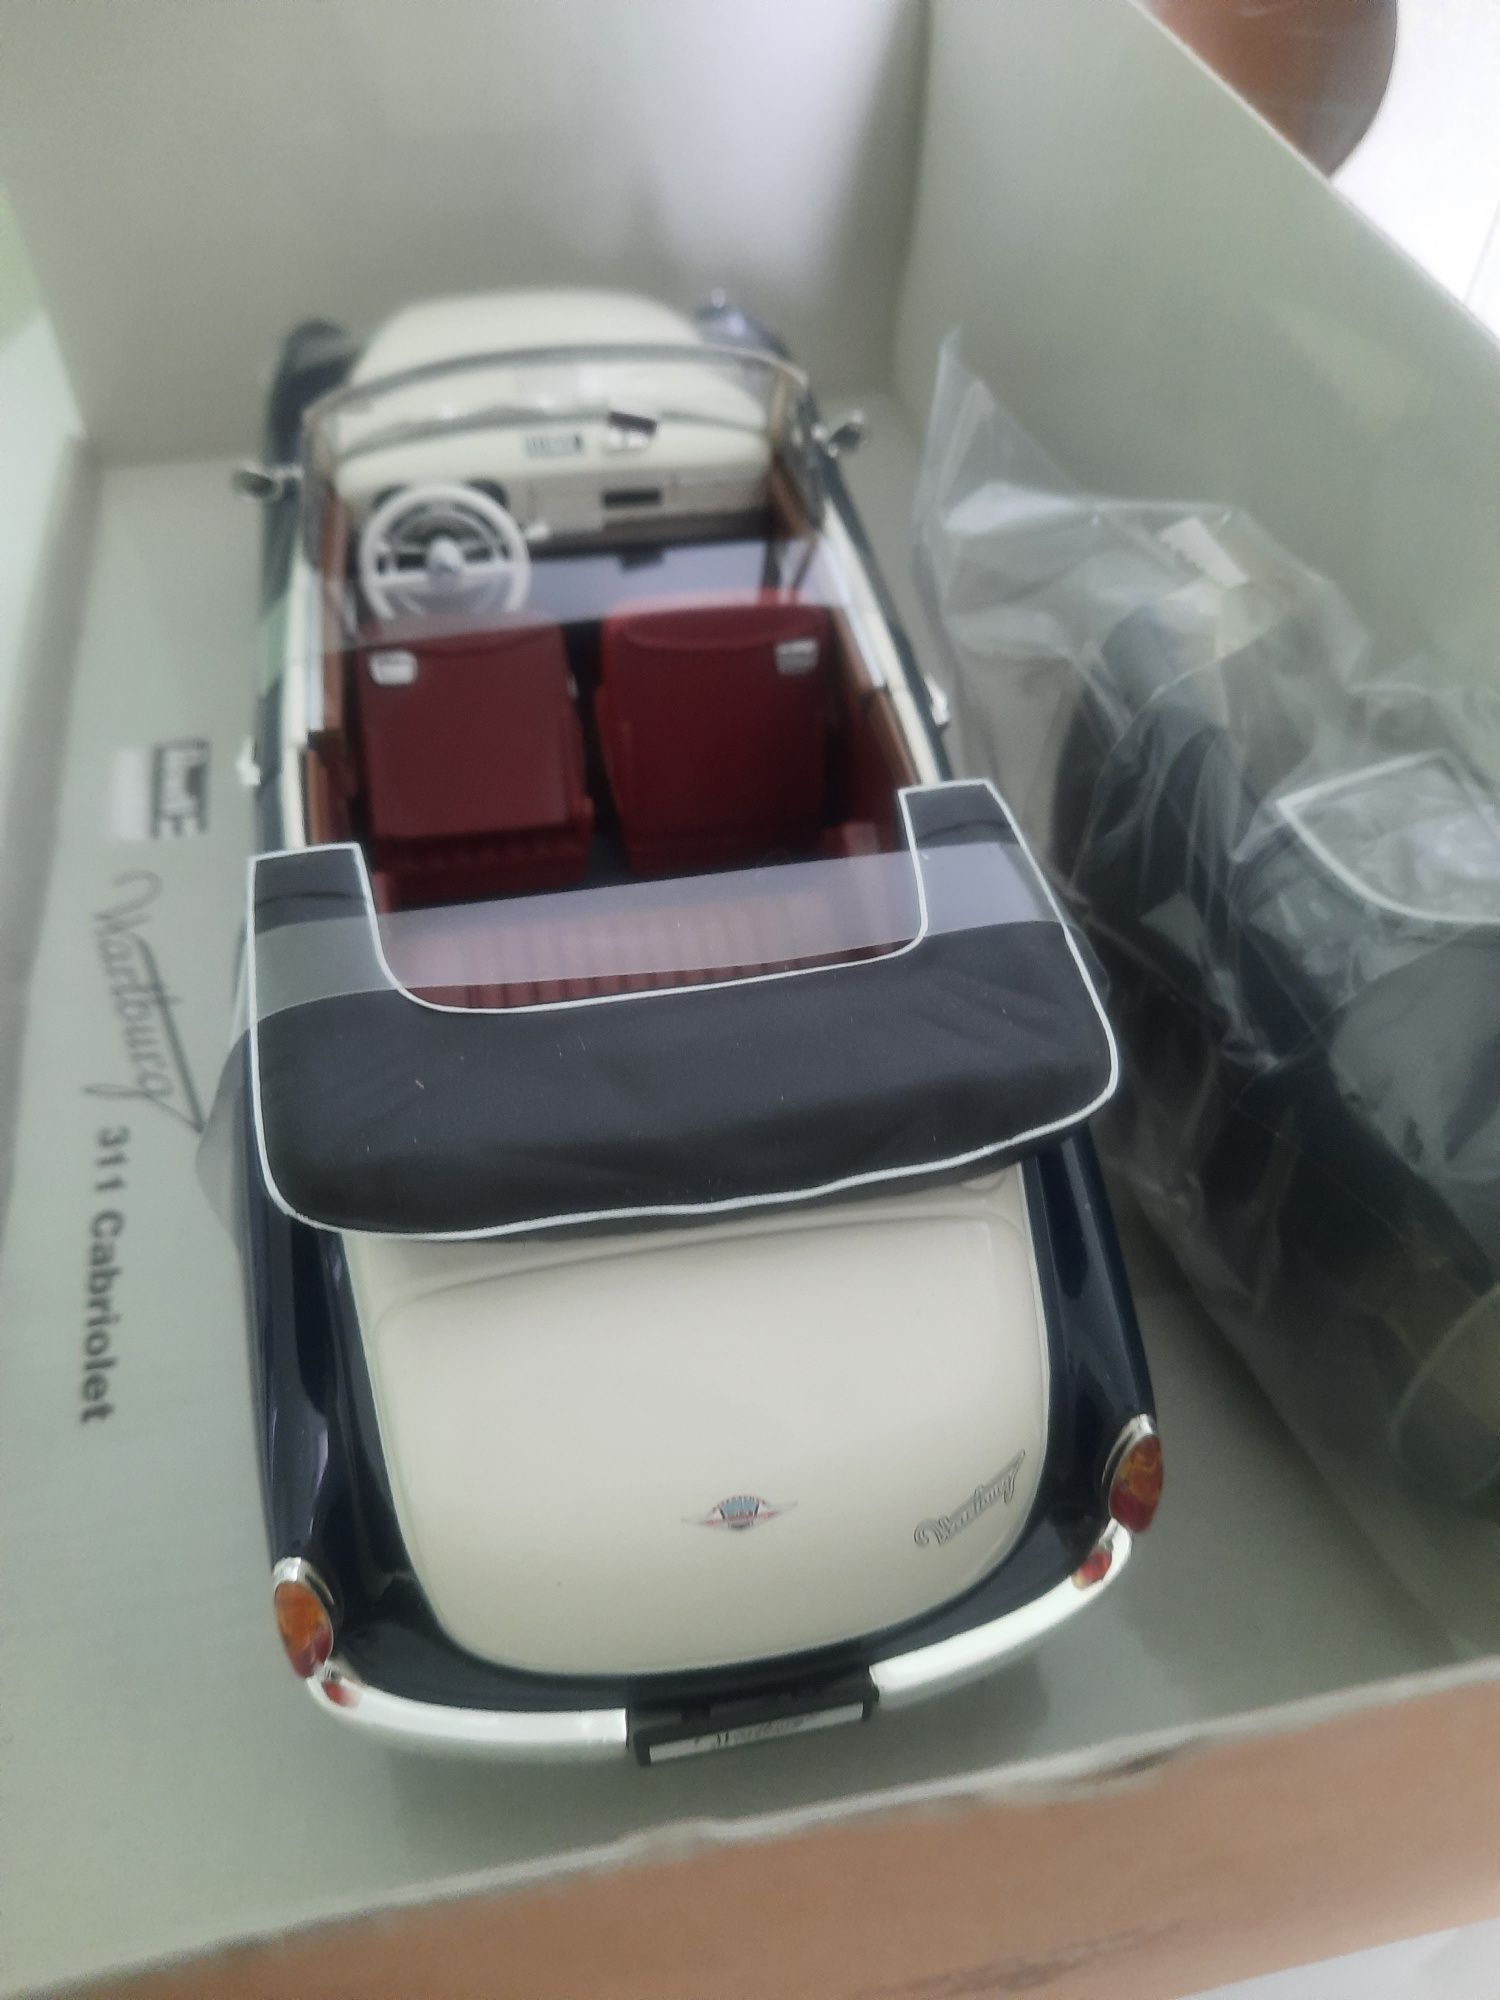 Wartburg 311 coupe cabriolet nowy revell 1:18